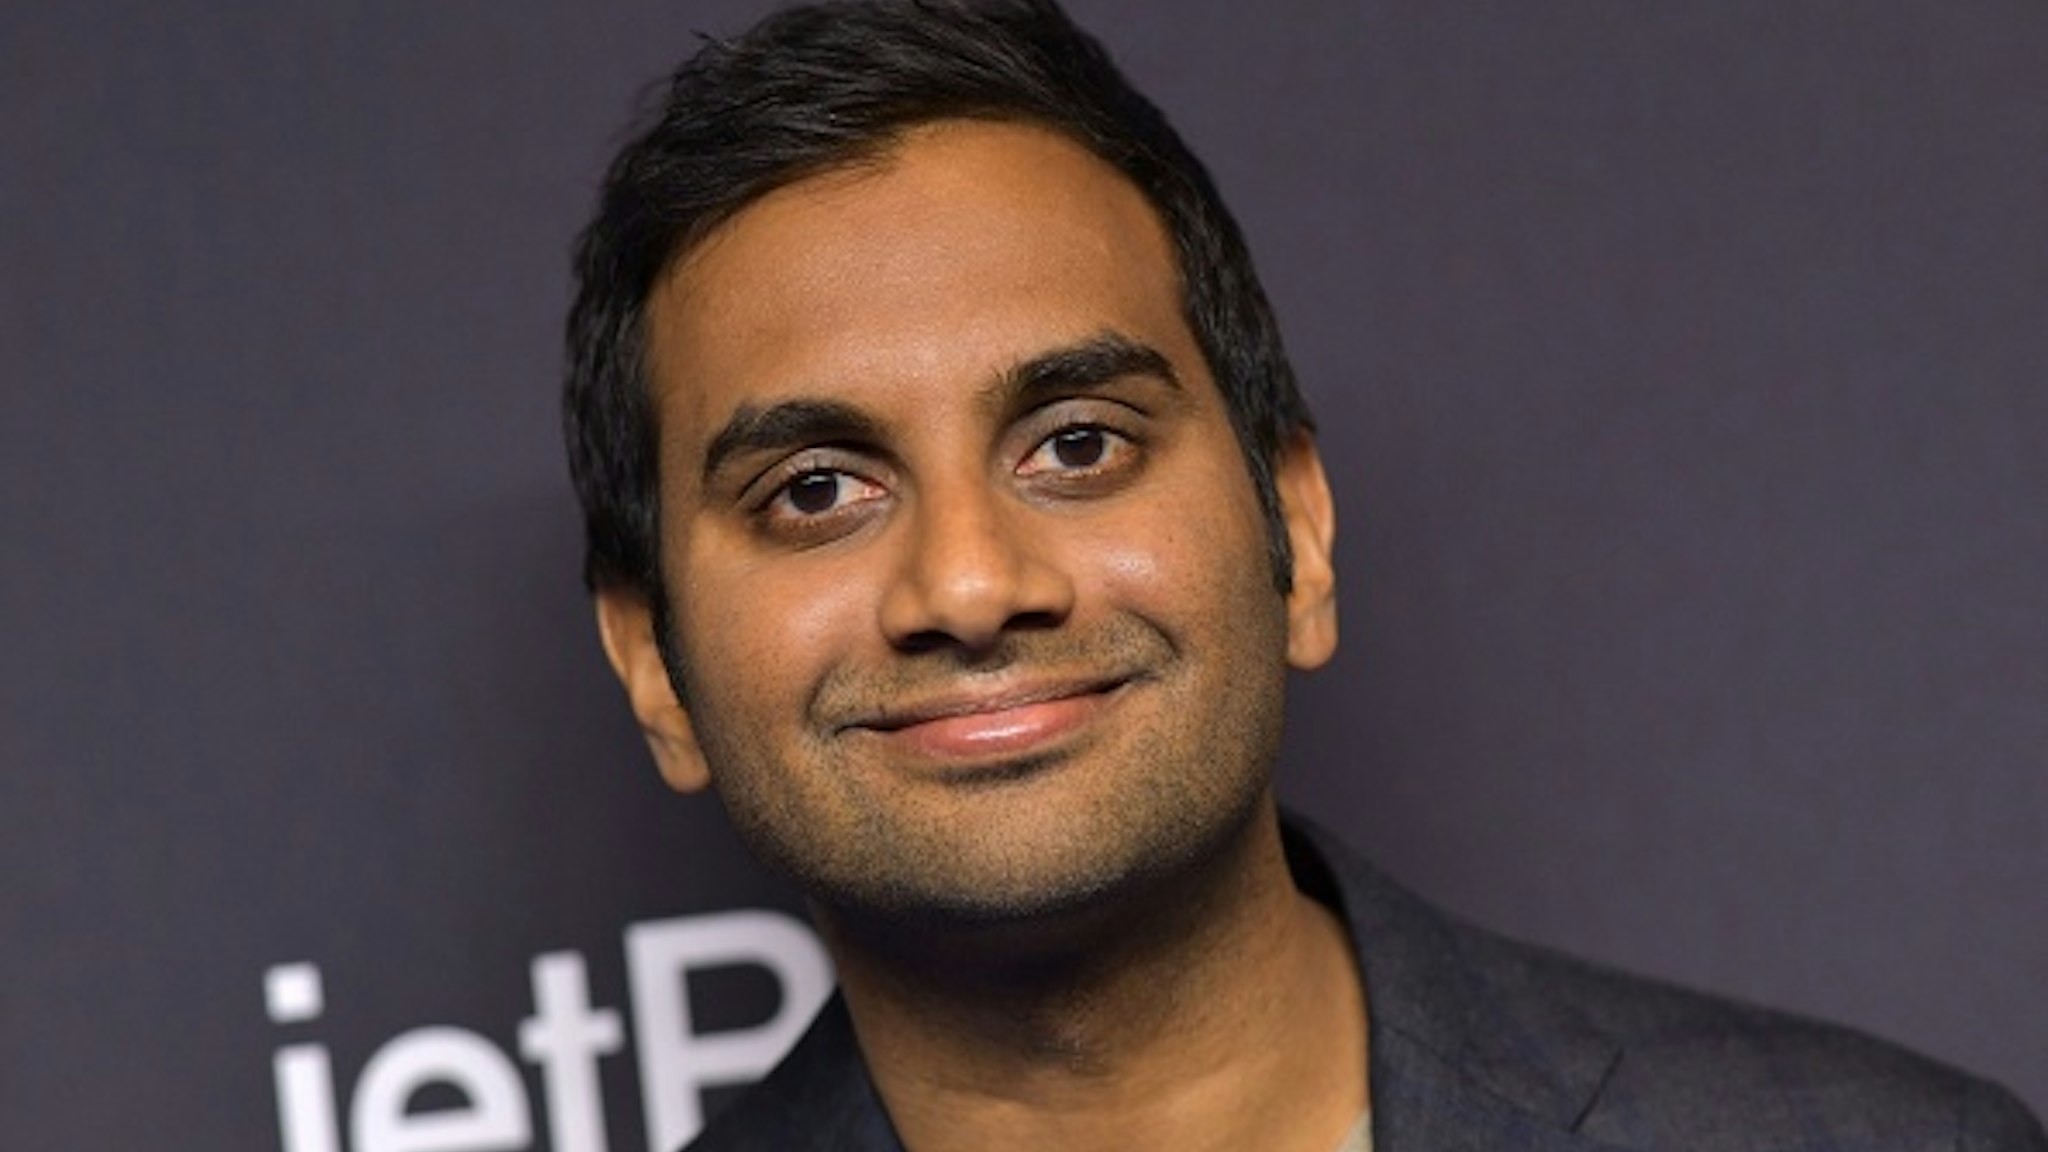 US actor Aziz Ansari arrives for the PaleyFest presentation of NBC's "Parks and Recreation" 10th Anniversary Reunion at the Dolby theatre on March 21, 2019 in Hollywood.